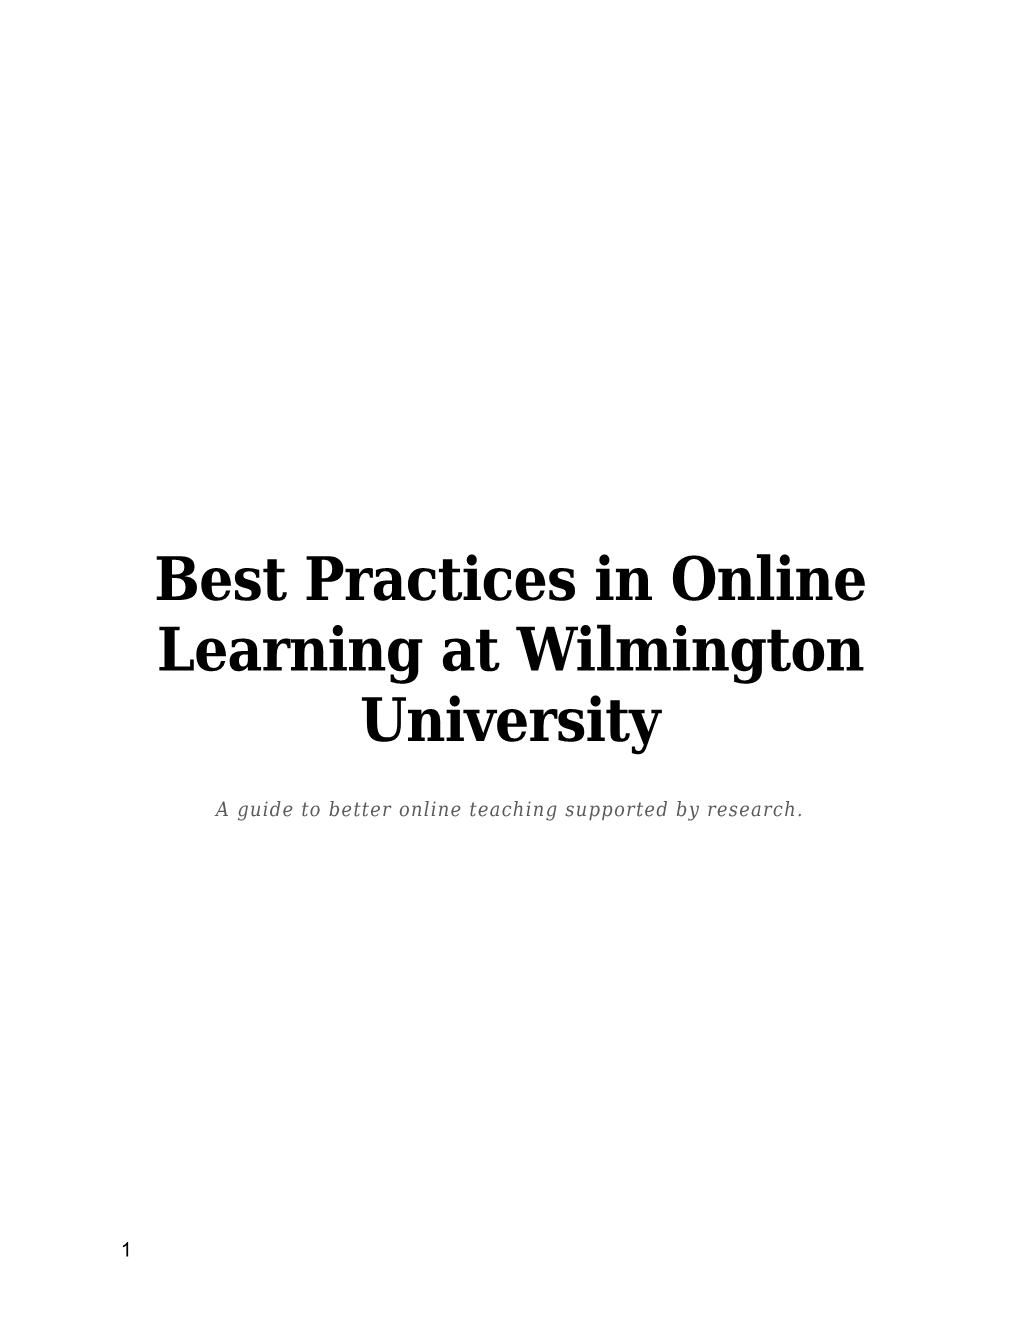 Best Practices in Online Learning at Wilmington University